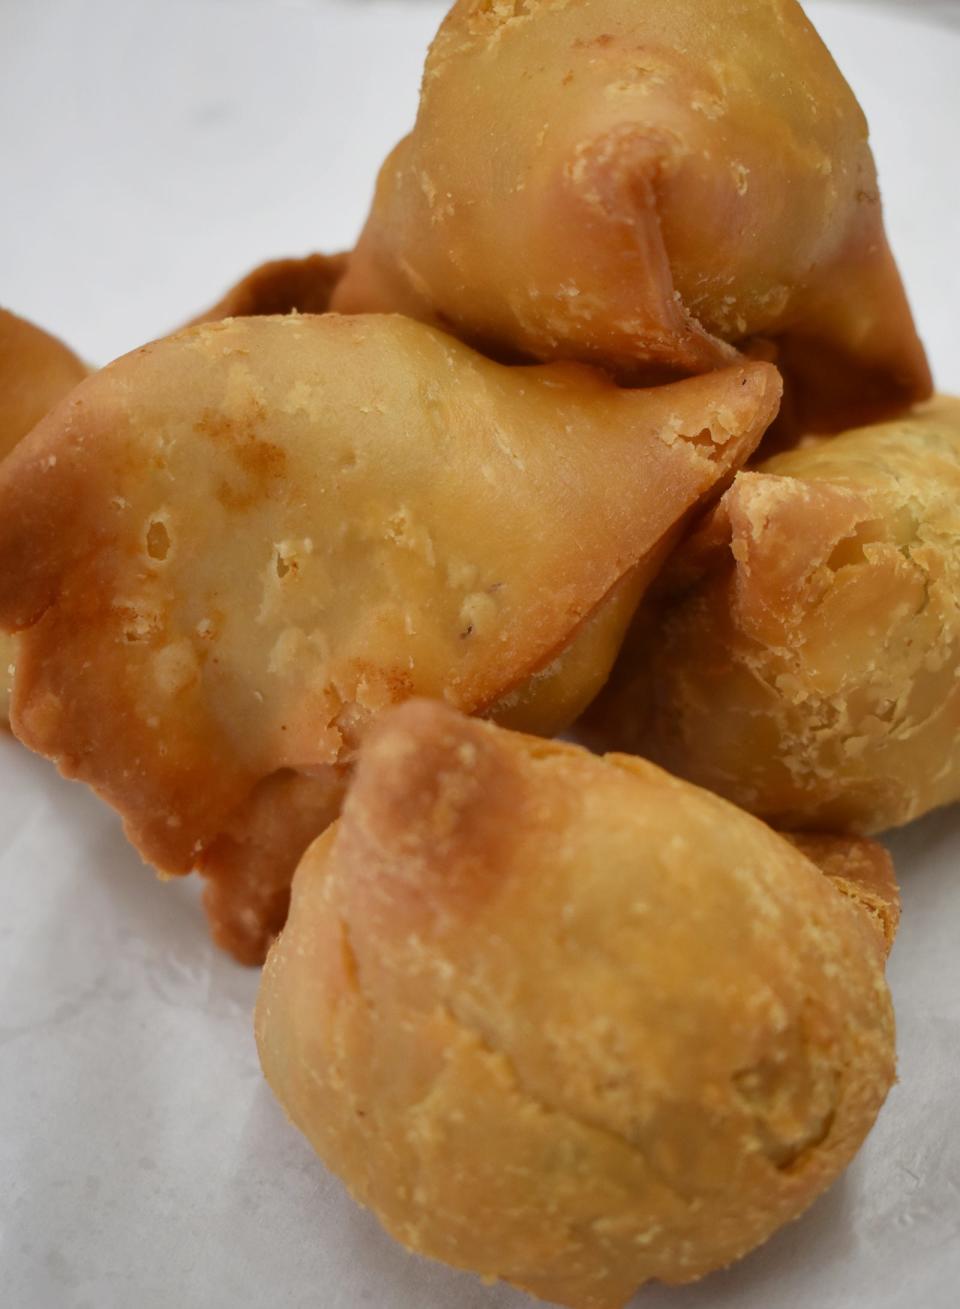 Samosas at Big Bazaar Indian Grocery in Fall River are a stop on Viva Fall River's Self-Guided Pie Tour.